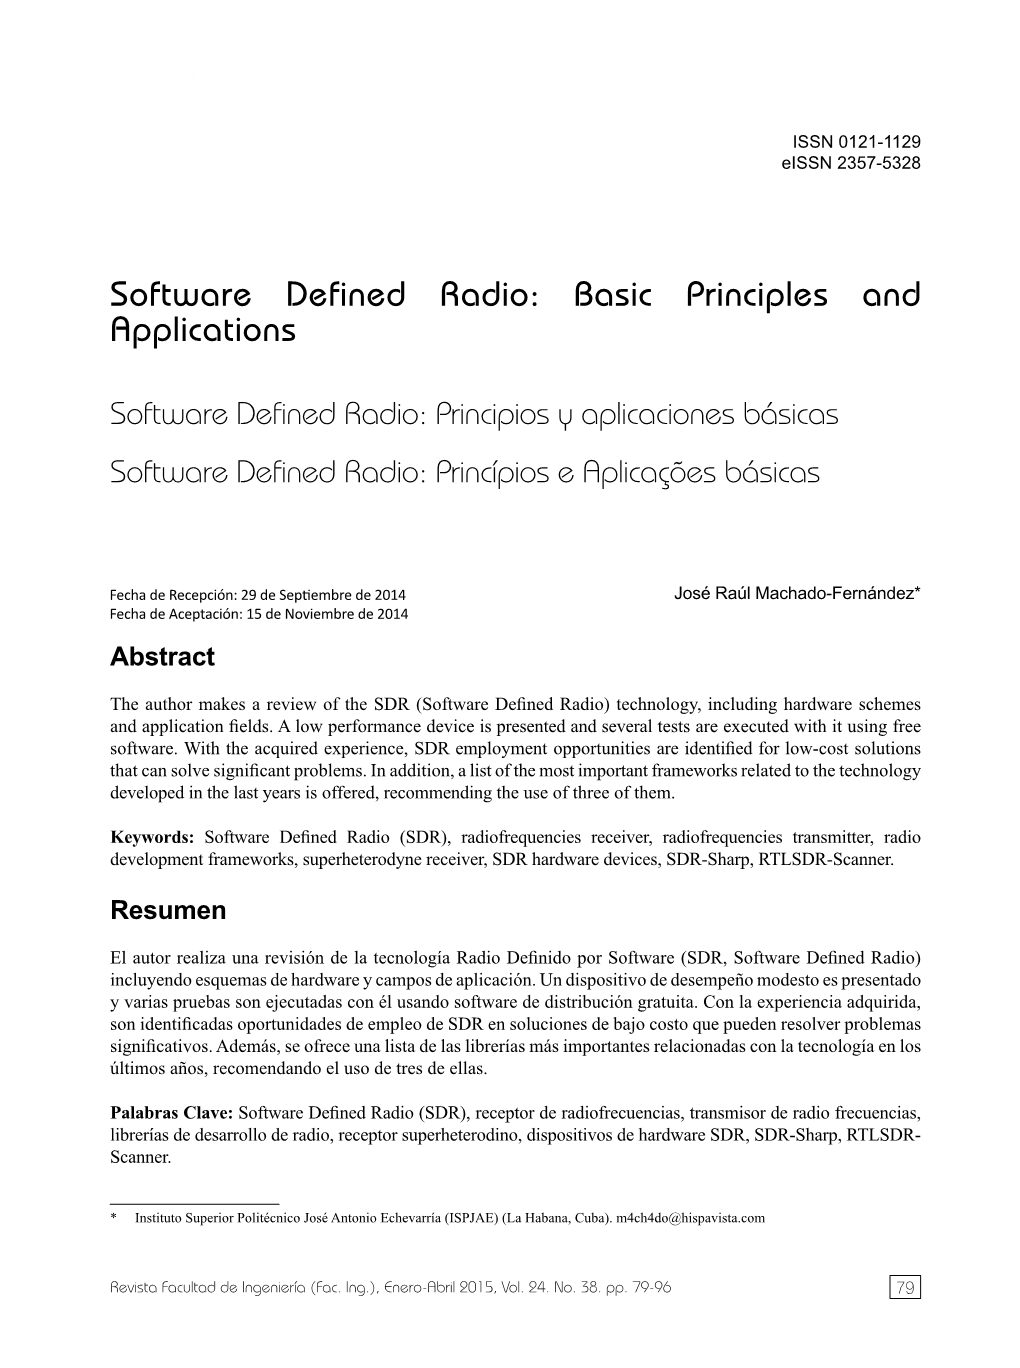 Software Defined Radio: Basic Principles and Applications